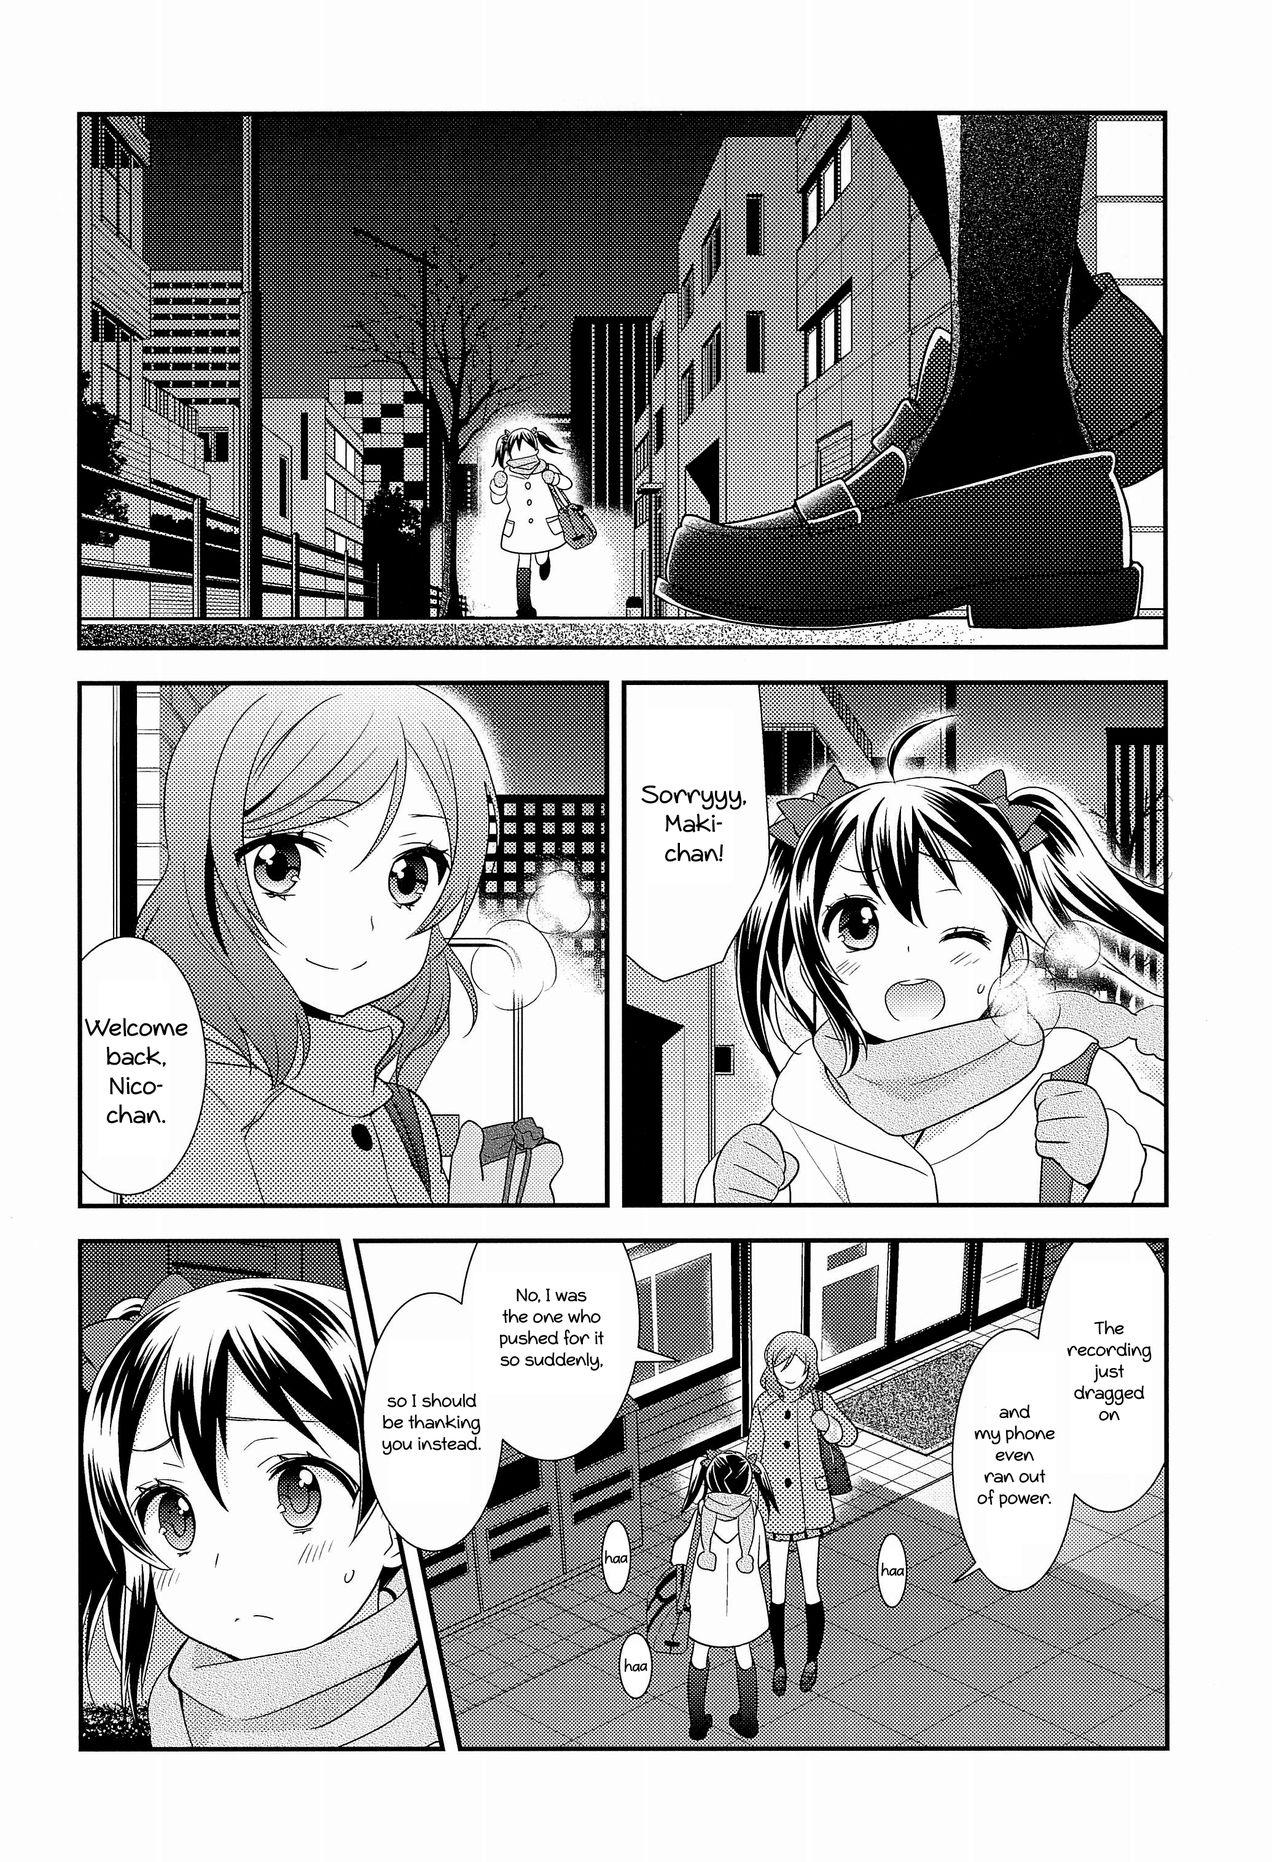 Naughty BABY I LOVE YOU - Love live New - Page 4